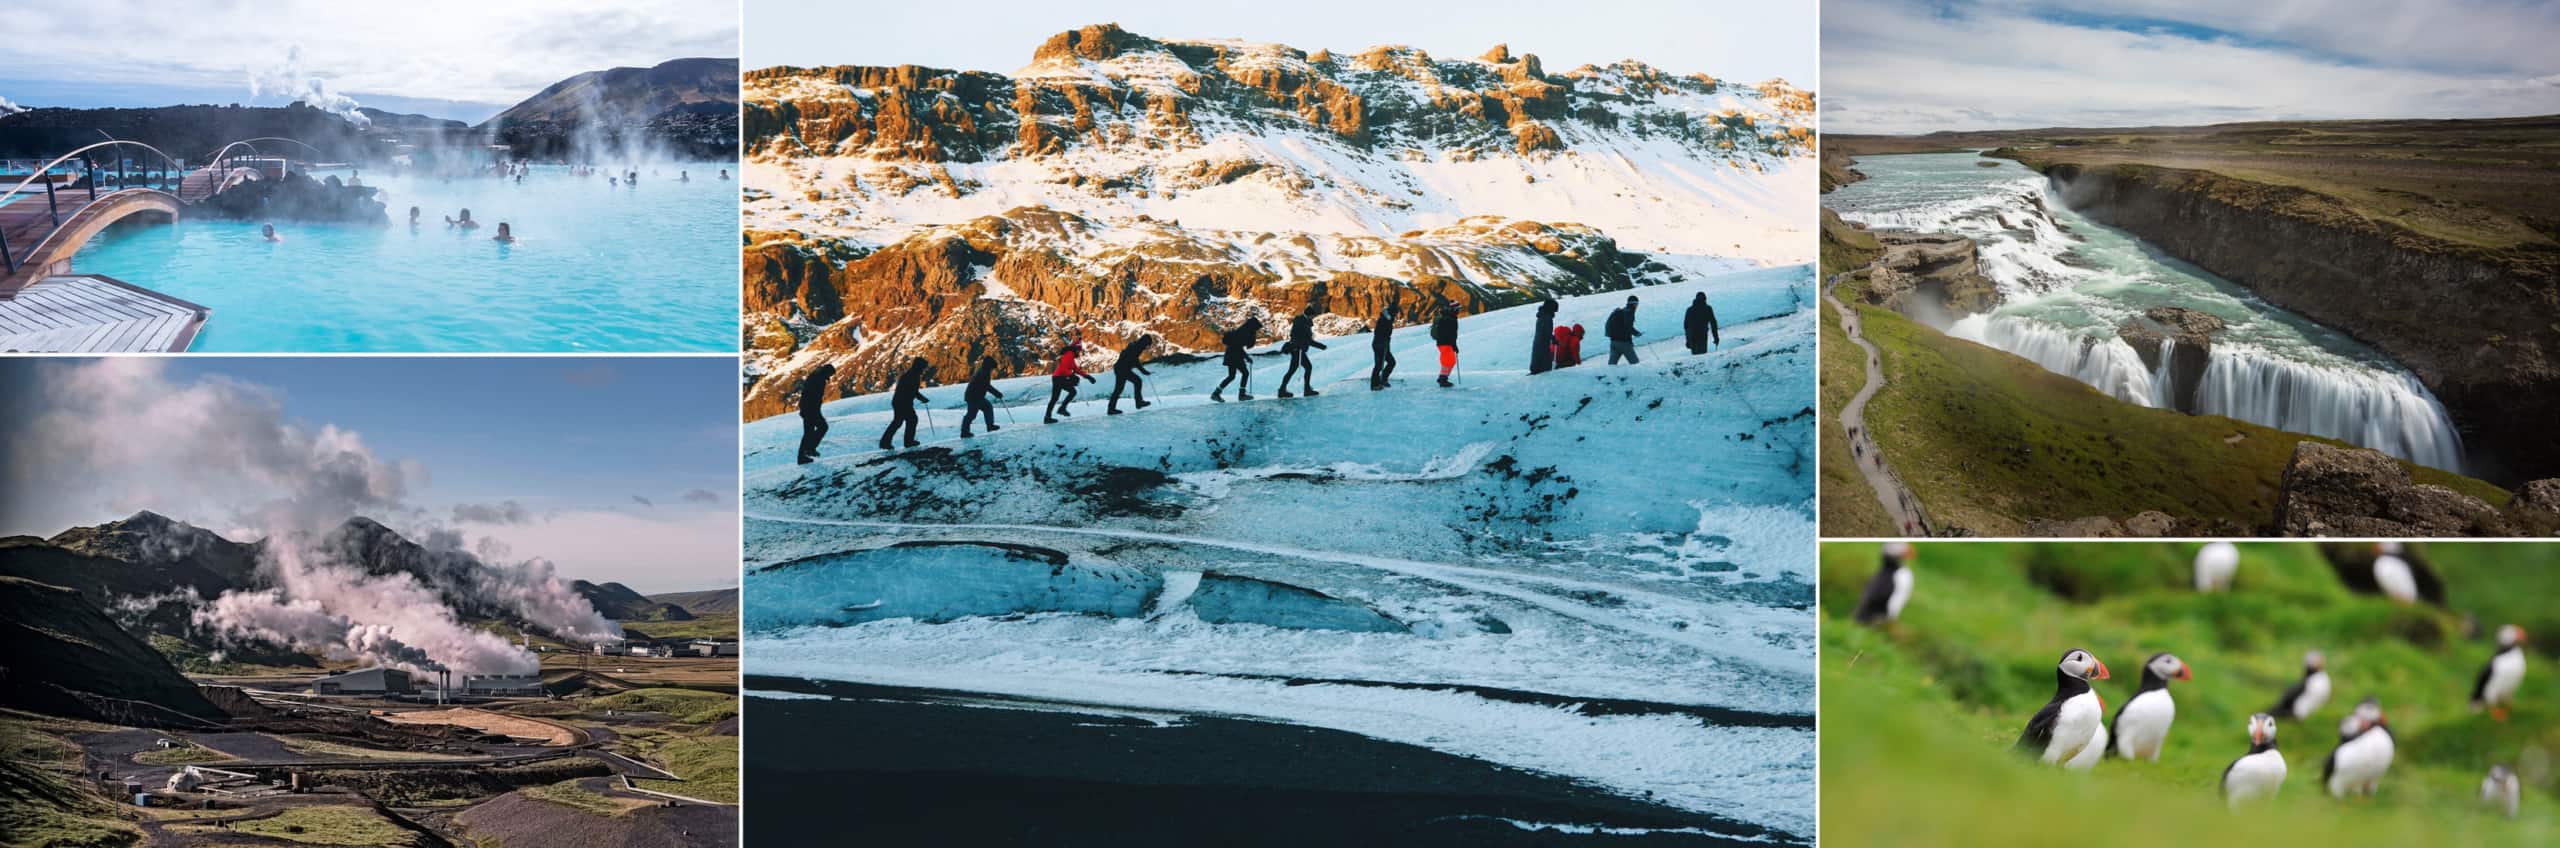 Iceland Adventure such as hiking on a glacier, the Blue Lagoon and puffins